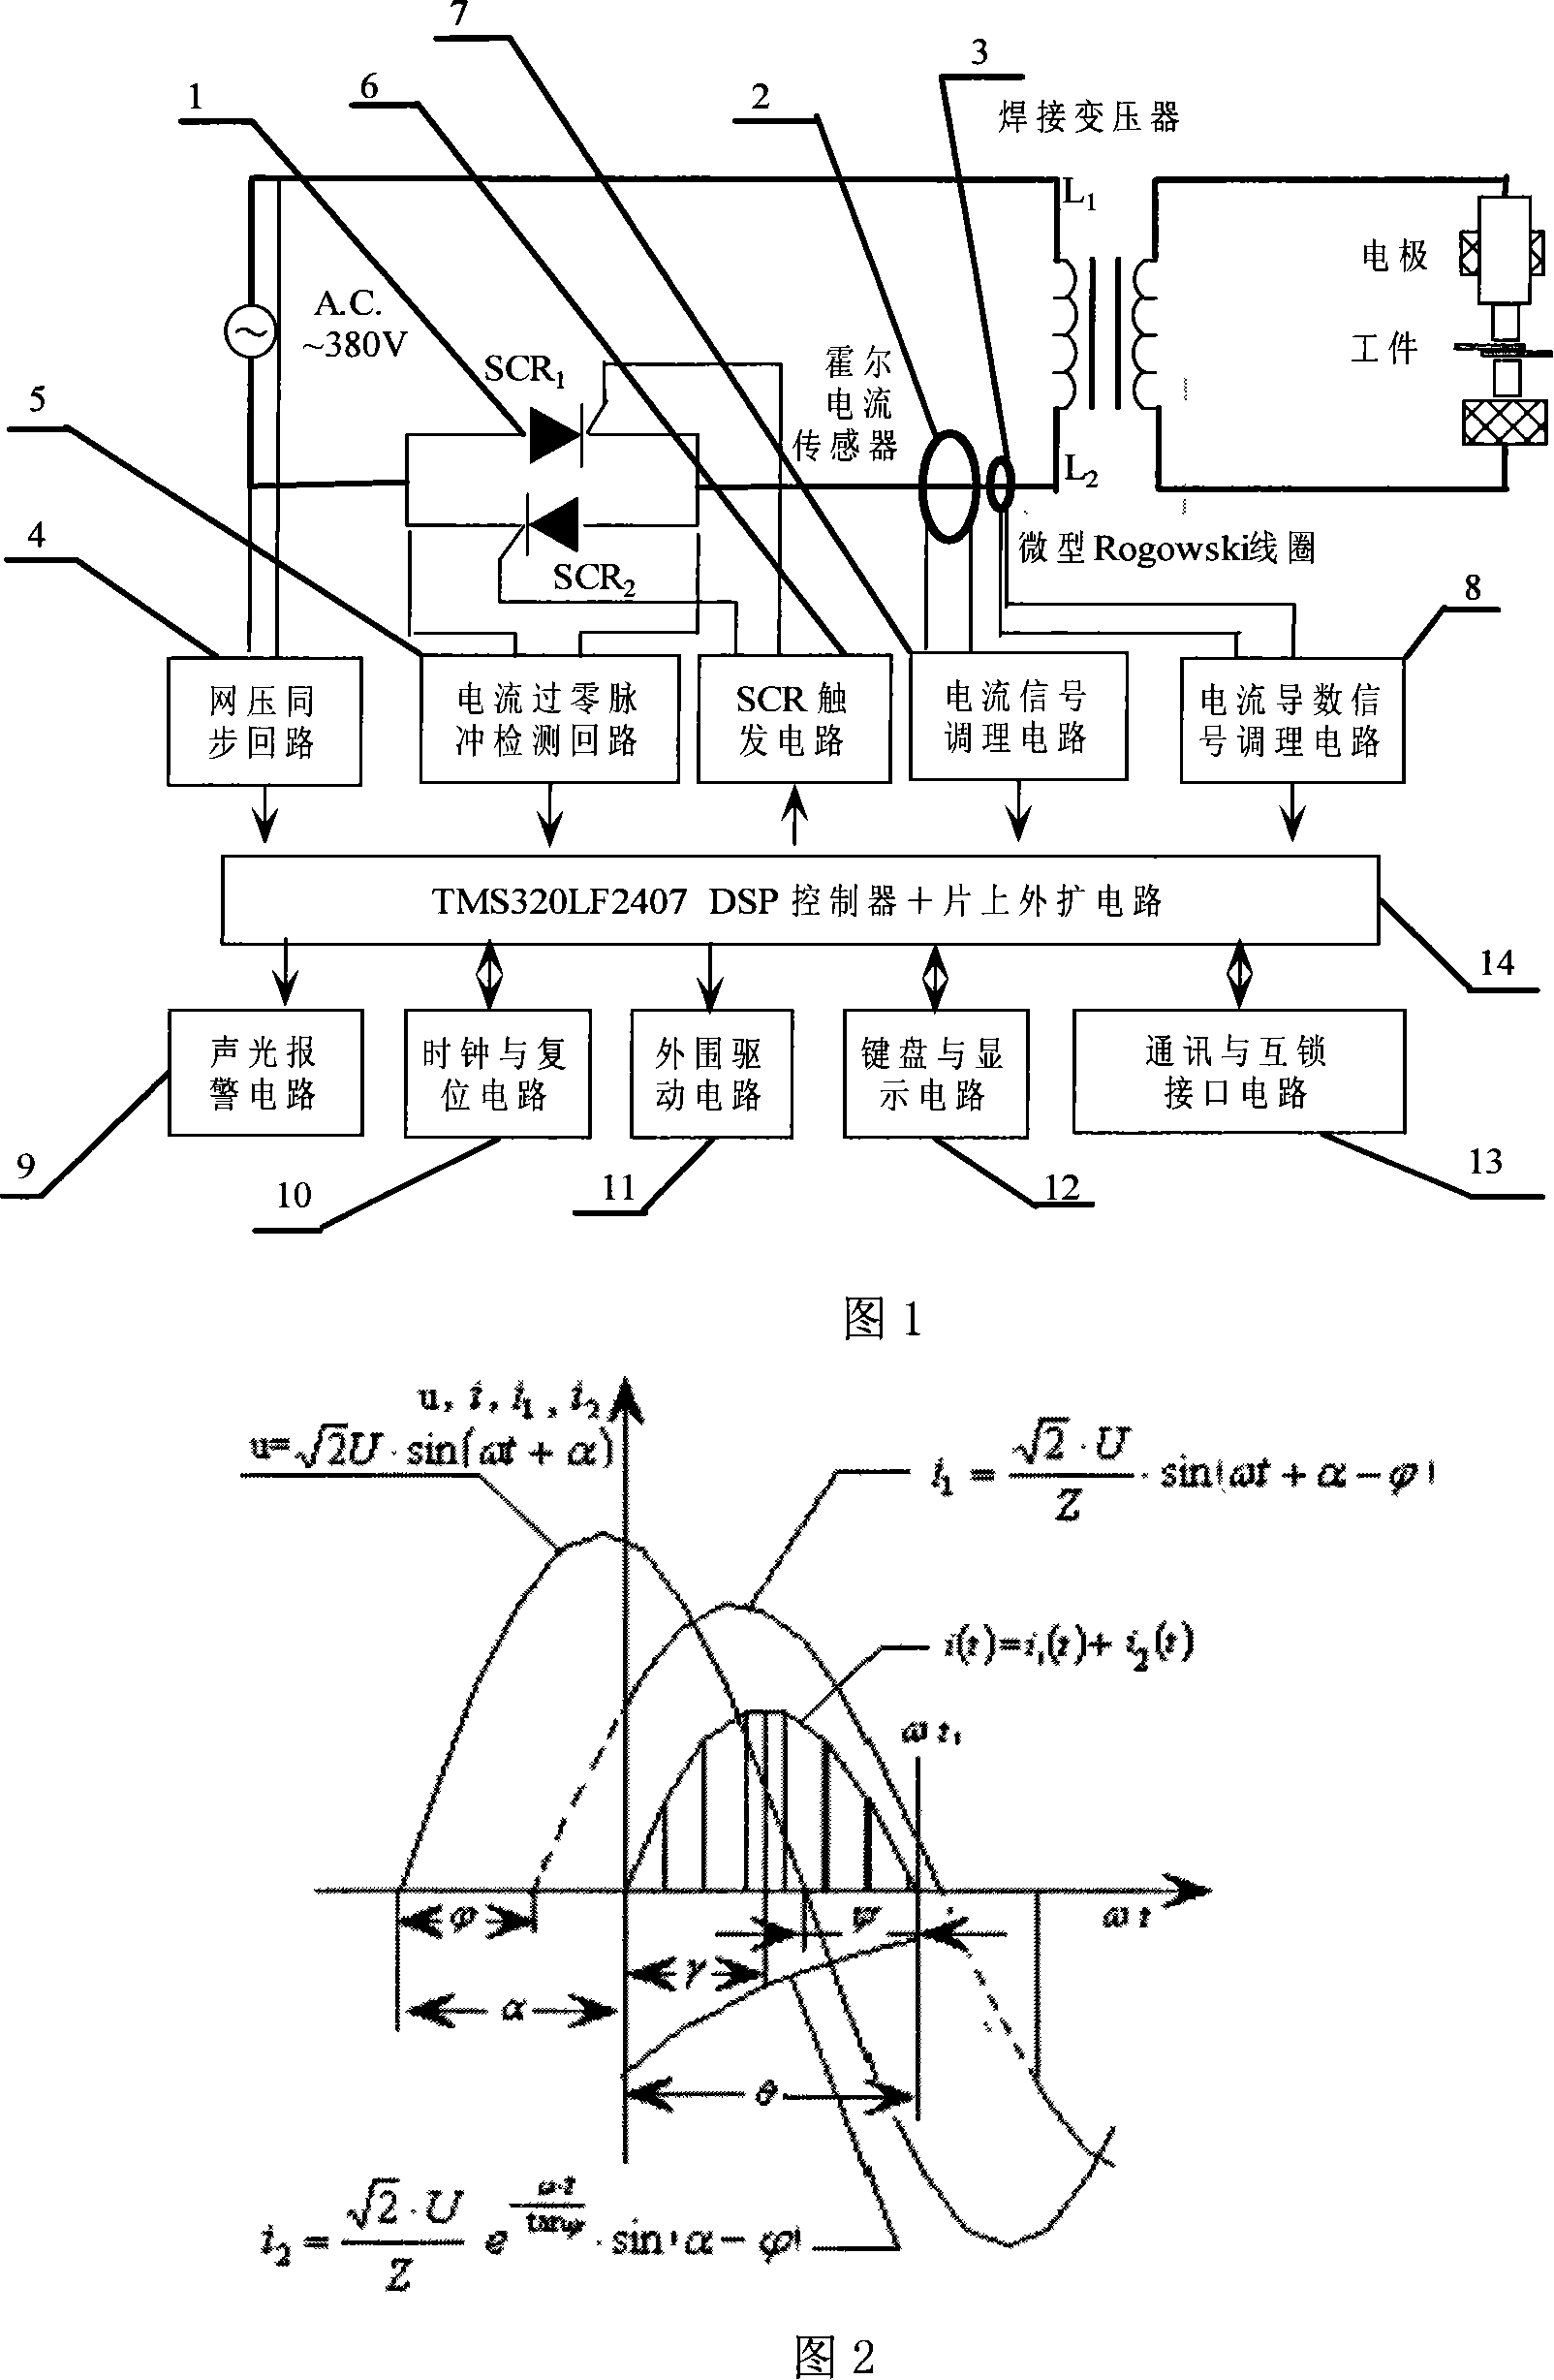 AC spot-welding dynamic electric resistance real-time measuring device and method